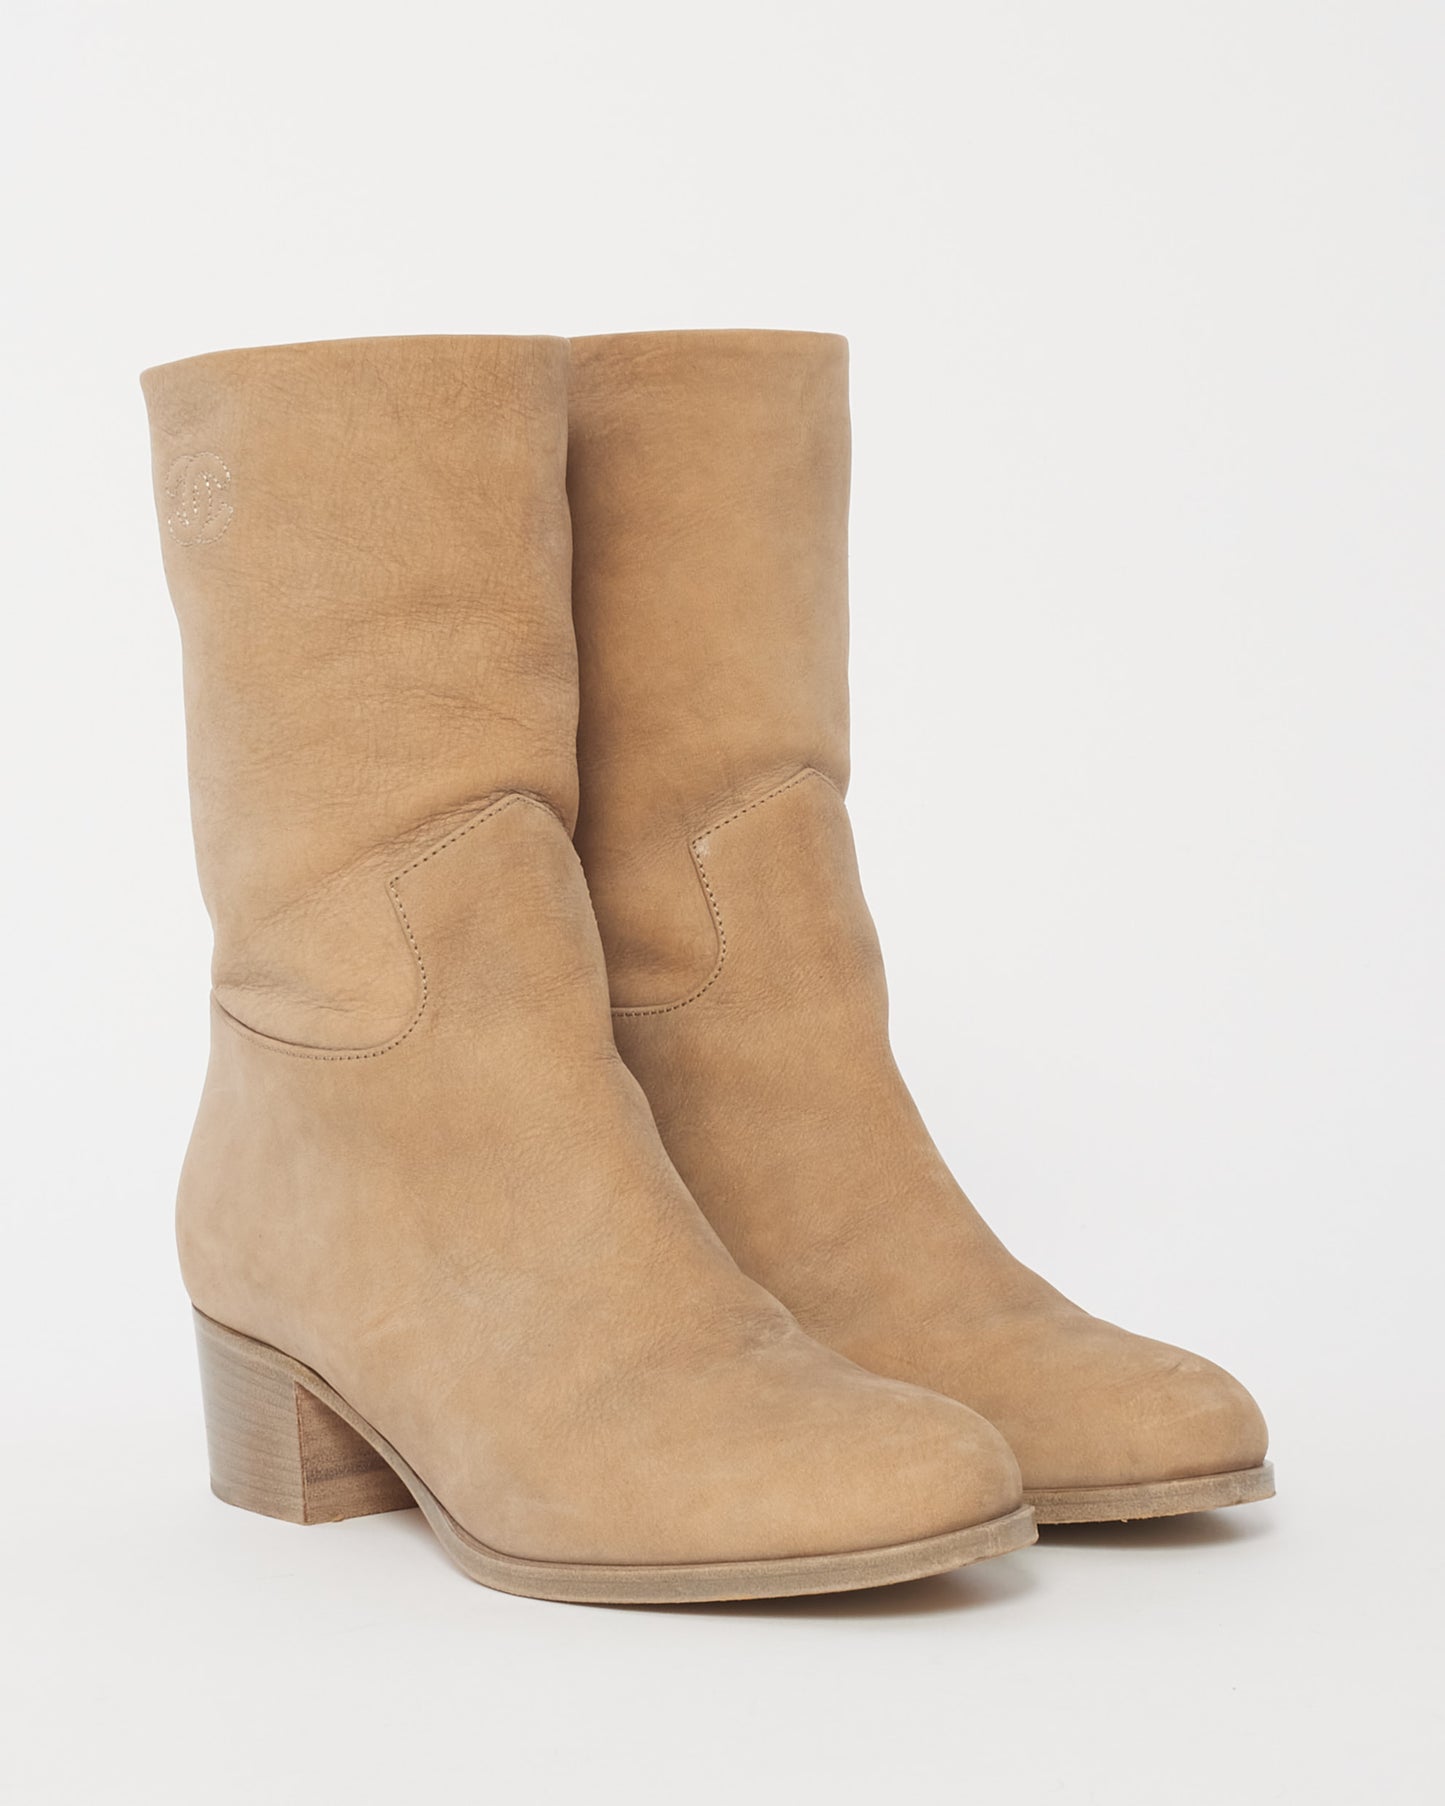 Chanel Light Beige Suede Logo Stitch Ankle Booties - 36.5